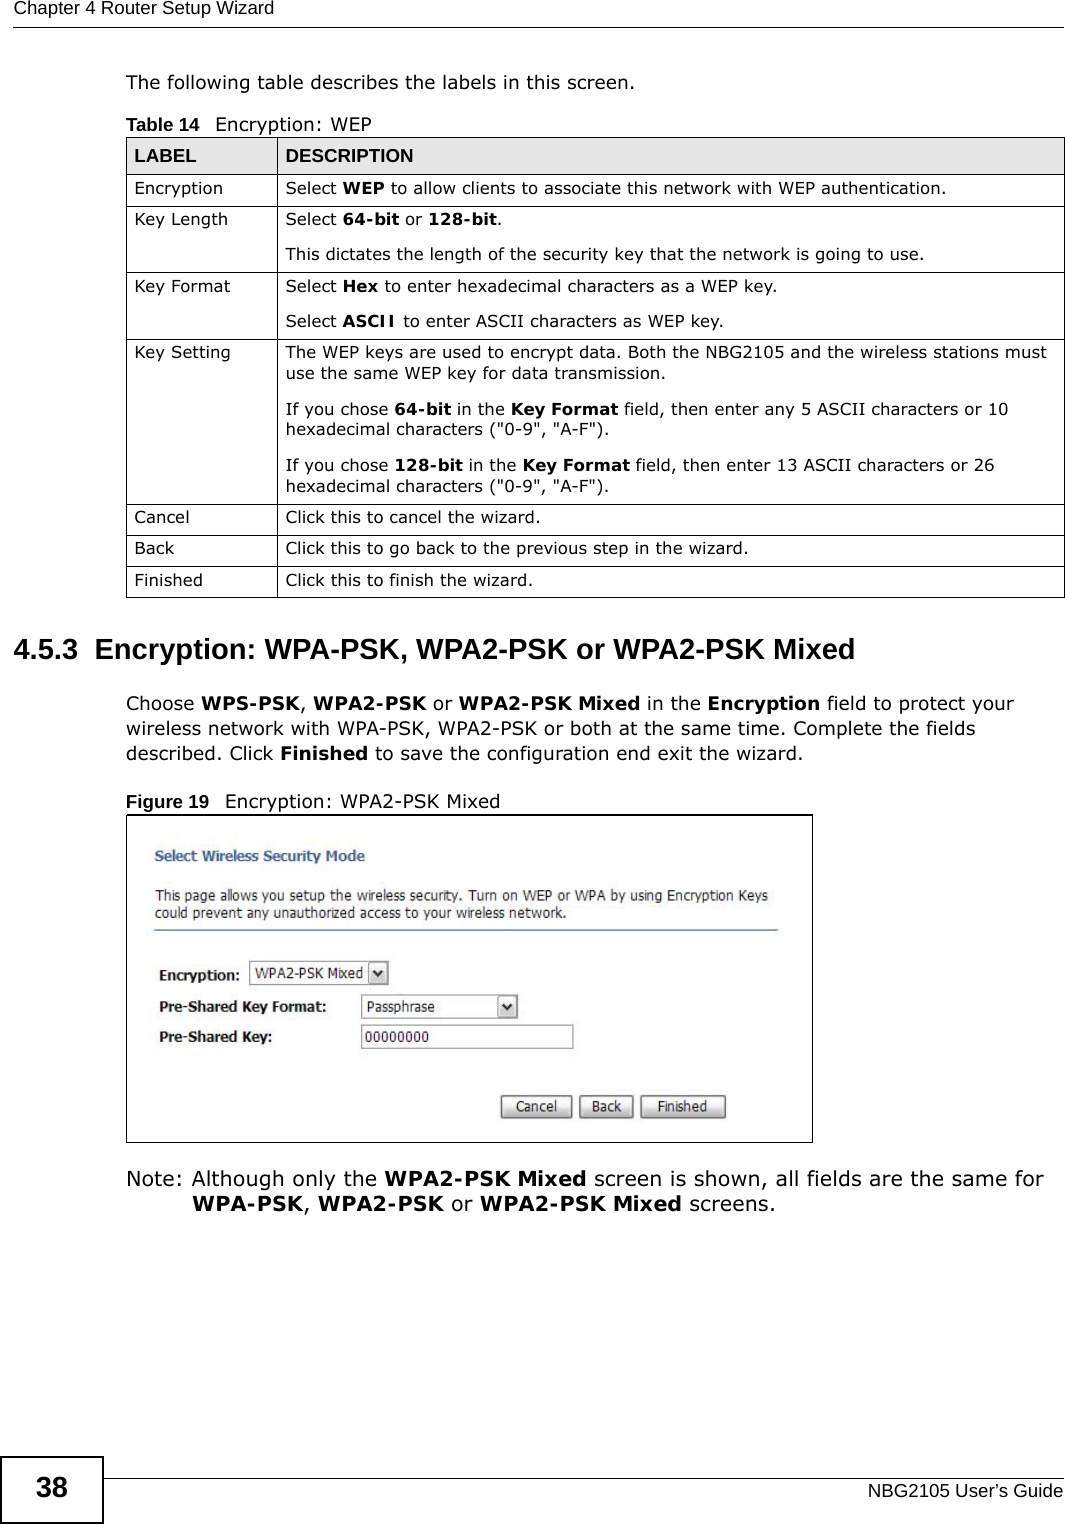 Chapter 4 Router Setup WizardNBG2105 User’s Guide38The following table describes the labels in this screen. 4.5.3  Encryption: WPA-PSK, WPA2-PSK or WPA2-PSK MixedChoose WPS-PSK, WPA2-PSK or WPA2-PSK Mixed in the Encryption field to protect your wireless network with WPA-PSK, WPA2-PSK or both at the same time. Complete the fields described. Click Finished to save the configuration end exit the wizard.Figure 19   Encryption: WPA2-PSK Mixed Note: Although only the WPA2-PSK Mixed screen is shown, all fields are the same for WPA-PSK, WPA2-PSK or WPA2-PSK Mixed screens.Table 14   Encryption: WEPLABEL DESCRIPTIONEncryption Select WEP to allow clients to associate this network with WEP authentication.Key Length Select 64-bit or 128-bit.This dictates the length of the security key that the network is going to use.Key Format Select Hex to enter hexadecimal characters as a WEP key. Select ASCII to enter ASCII characters as WEP key. Key Setting The WEP keys are used to encrypt data. Both the NBG2105 and the wireless stations must use the same WEP key for data transmission.If you chose 64-bit in the Key Format field, then enter any 5 ASCII characters or 10 hexadecimal characters (&quot;0-9&quot;, &quot;A-F&quot;).If you chose 128-bit in the Key Format field, then enter 13 ASCII characters or 26 hexadecimal characters (&quot;0-9&quot;, &quot;A-F&quot;). Cancel Click this to cancel the wizard.Back Click this to go back to the previous step in the wizard.Finished Click this to finish the wizard.